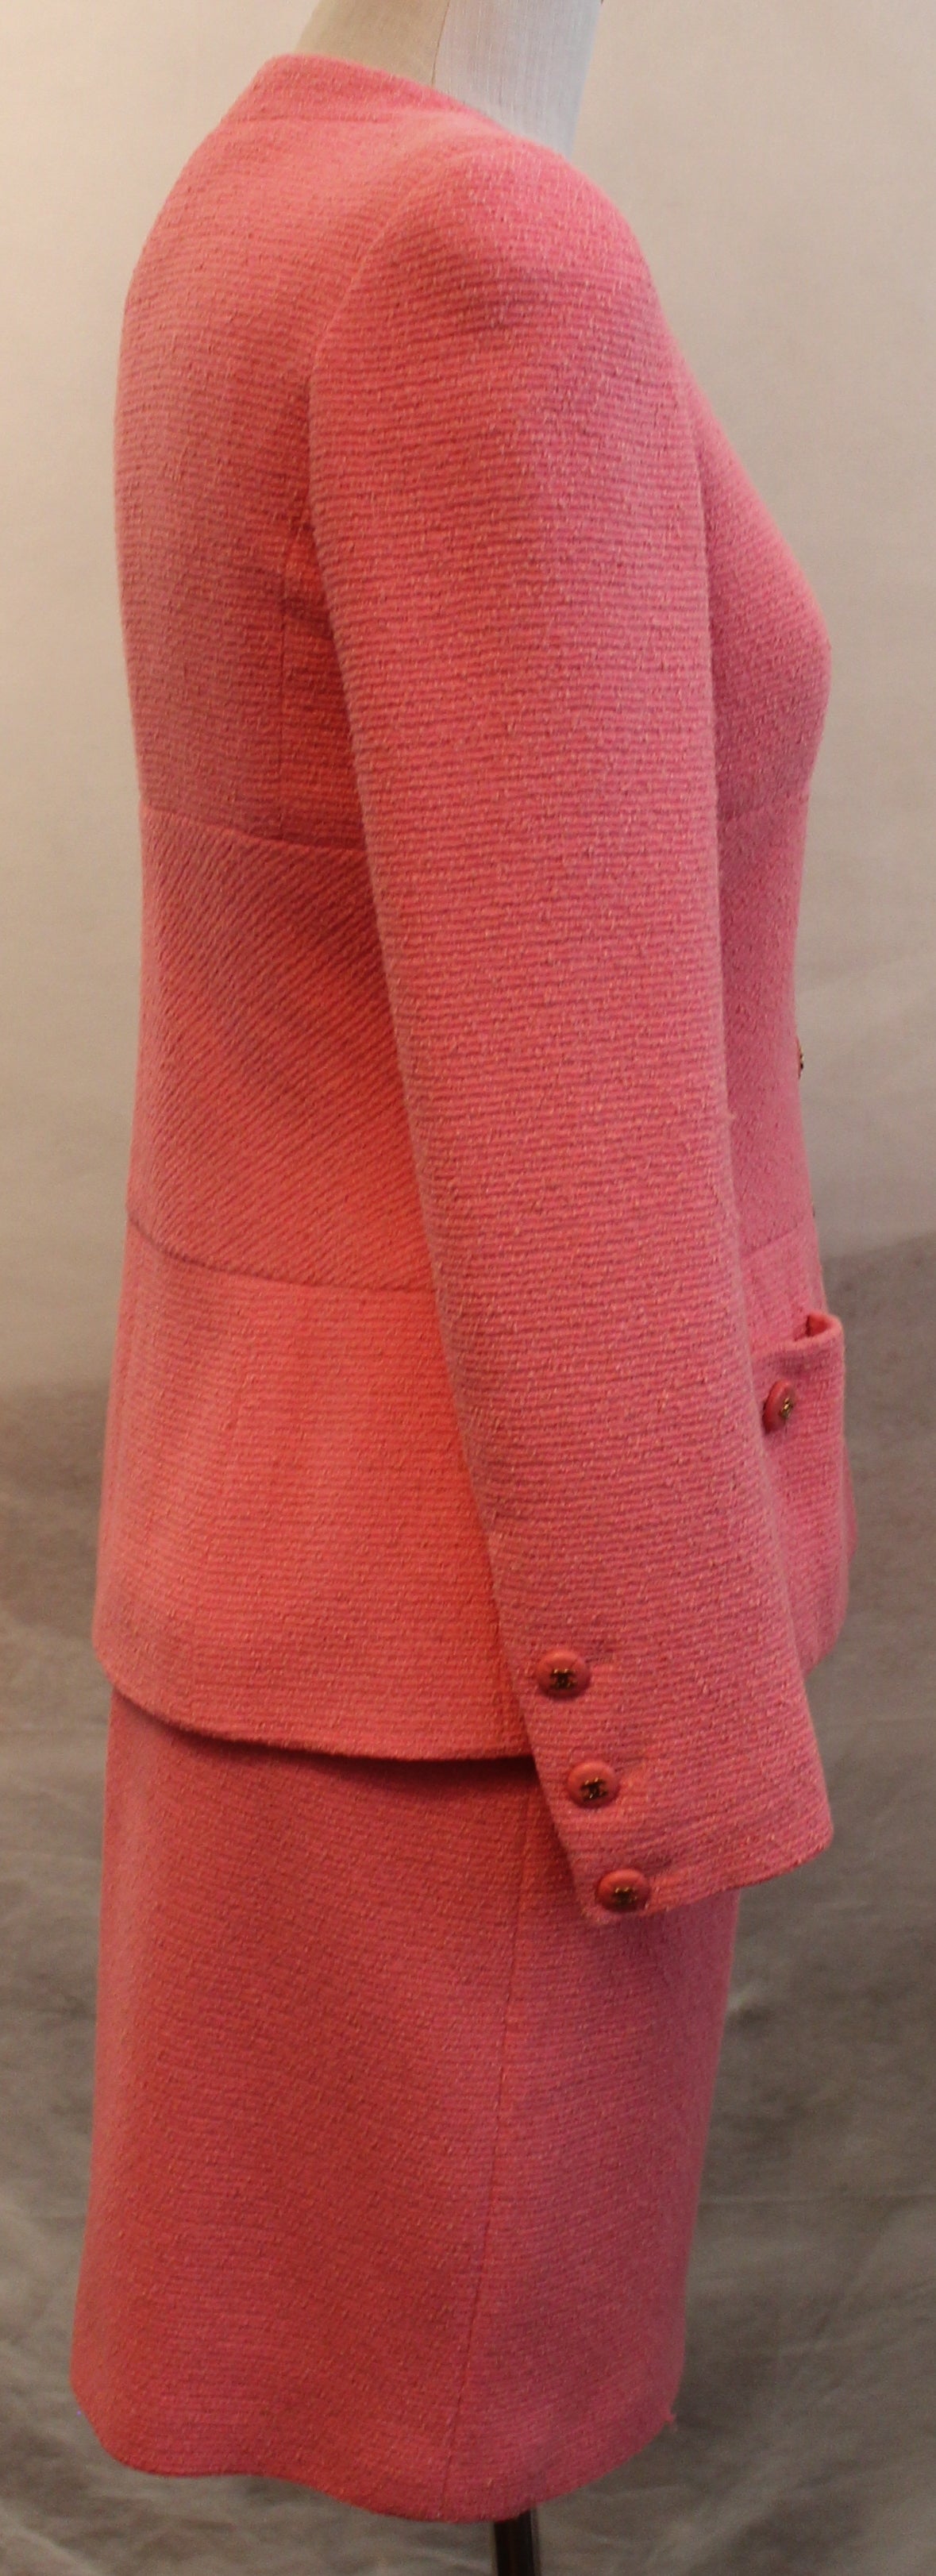 Chanel Pink Wool Classic Skirt Suit - 38 - Circa 80's
This timeless Pink Skirt suit is in very good vintage condition. It has 2 front pockets, Single breasted with 7 front buttons, Buttons on sleeves, round neck, beautiful lines on this classic